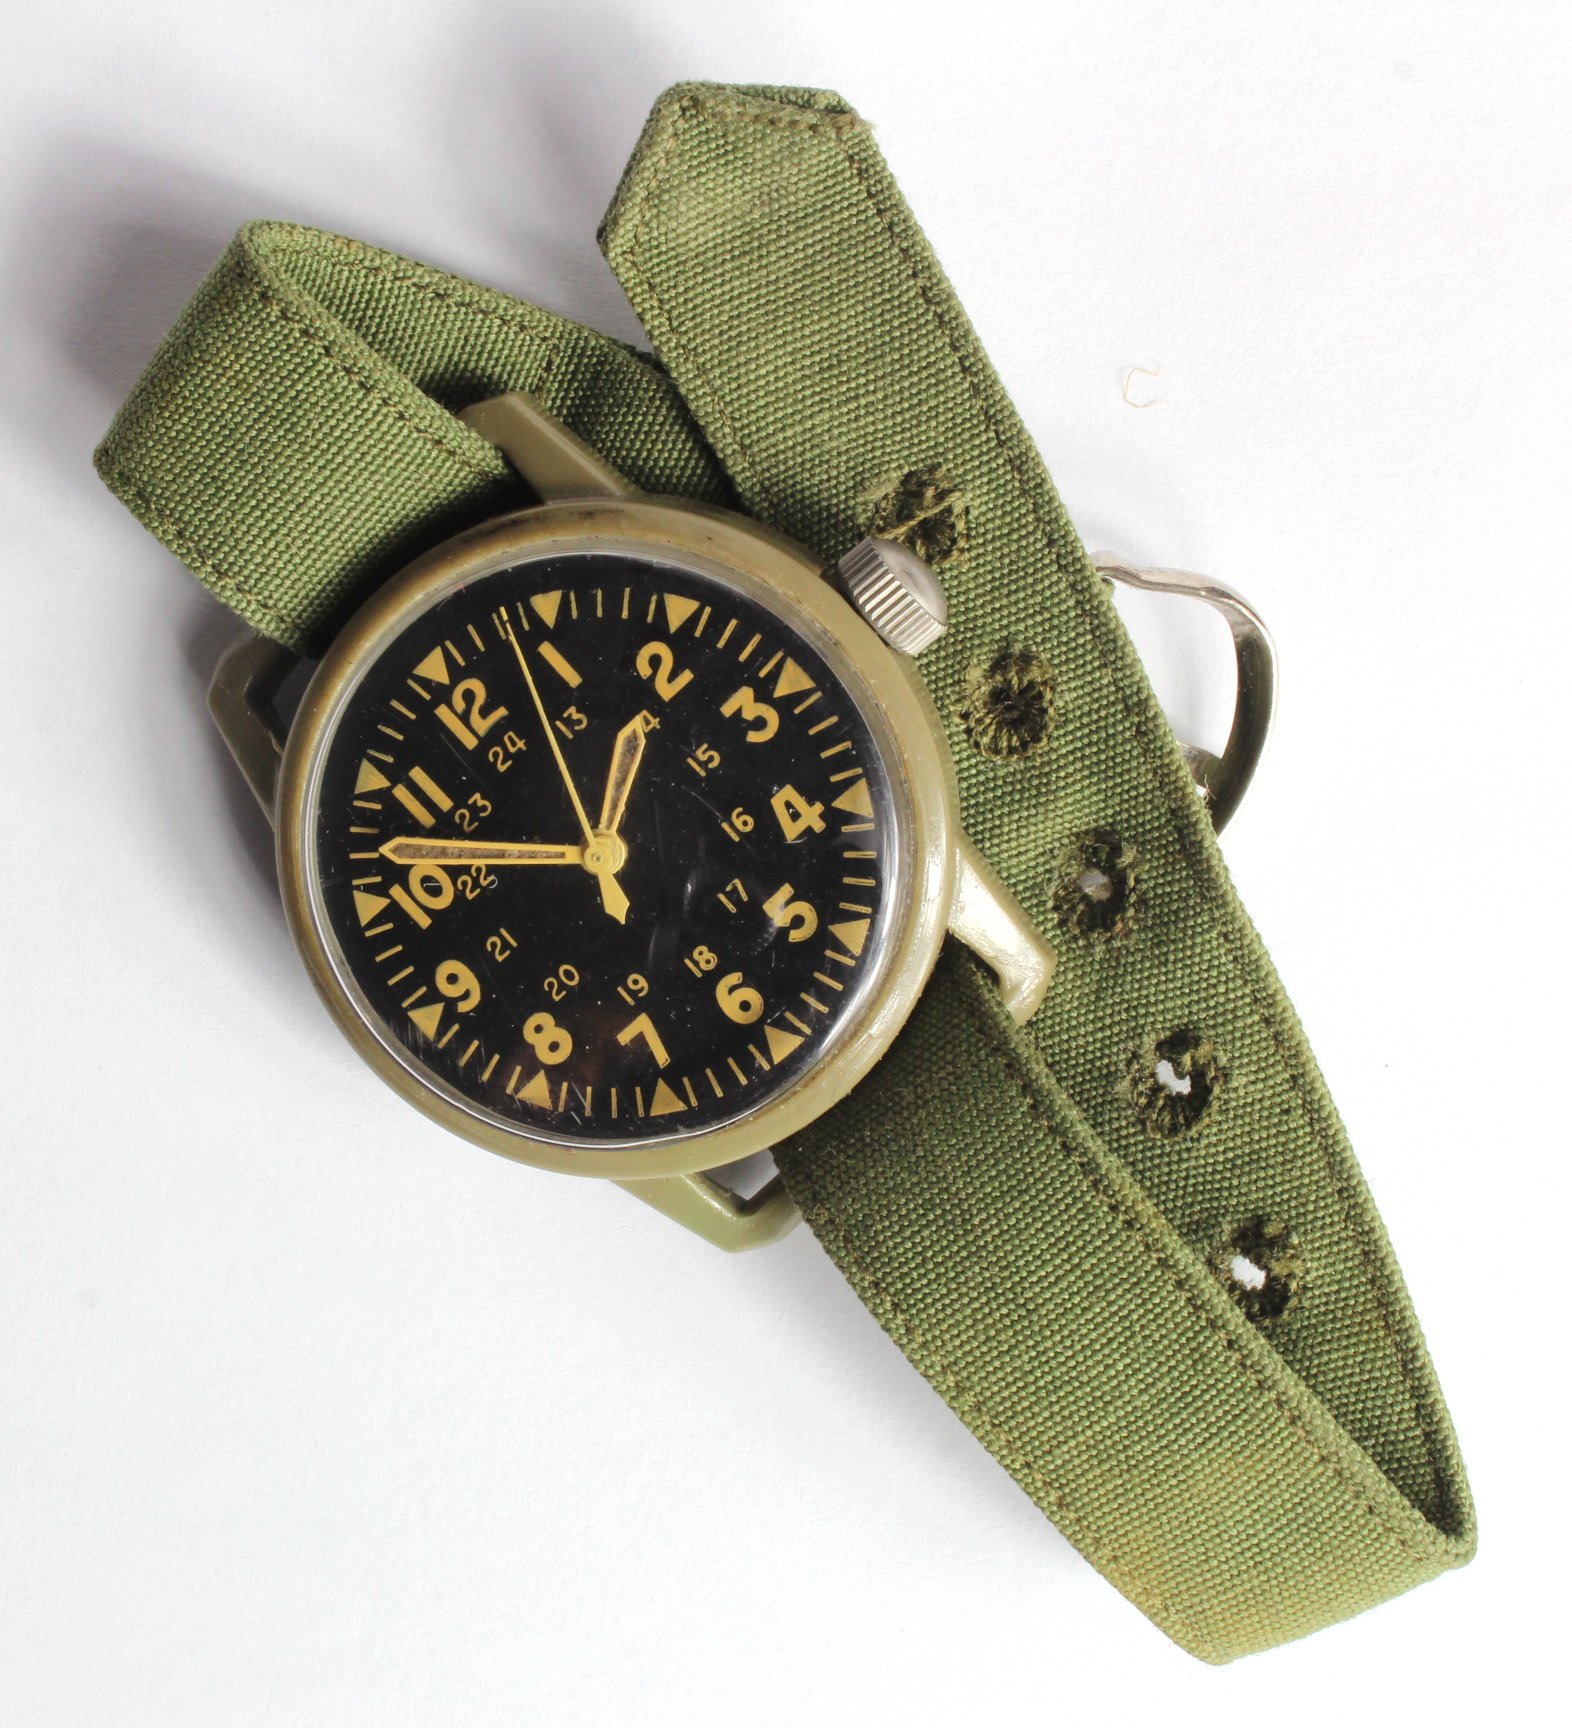 Vietnam War US Army Plastic Westclox Manual Wrist Watch and strap. Working when catalogued